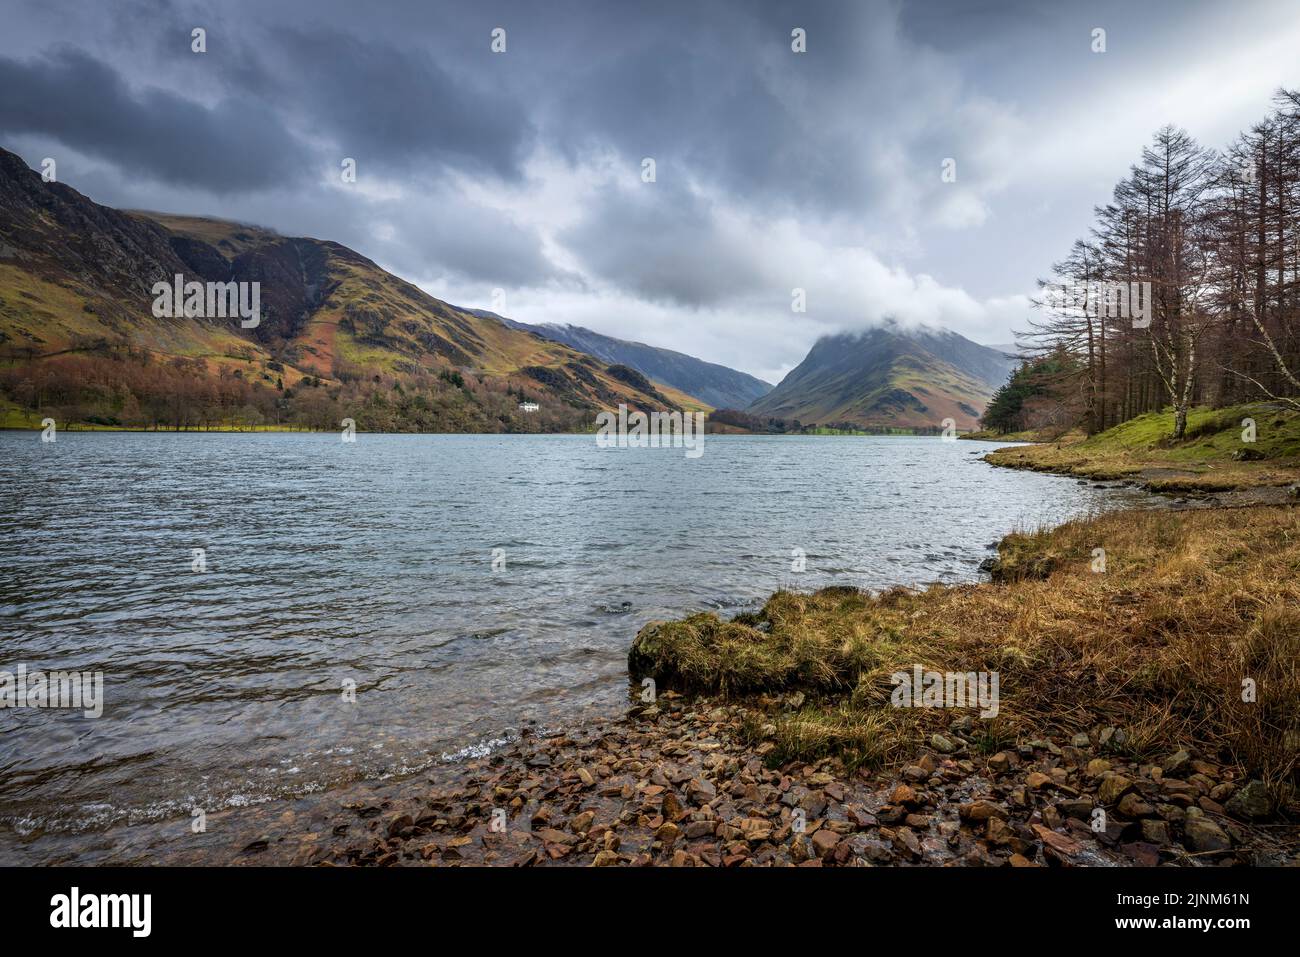 The Buttermere shoreline with Fleetwith Pike and the Honiston Pass in the background, Cumbria, England Stock Photo